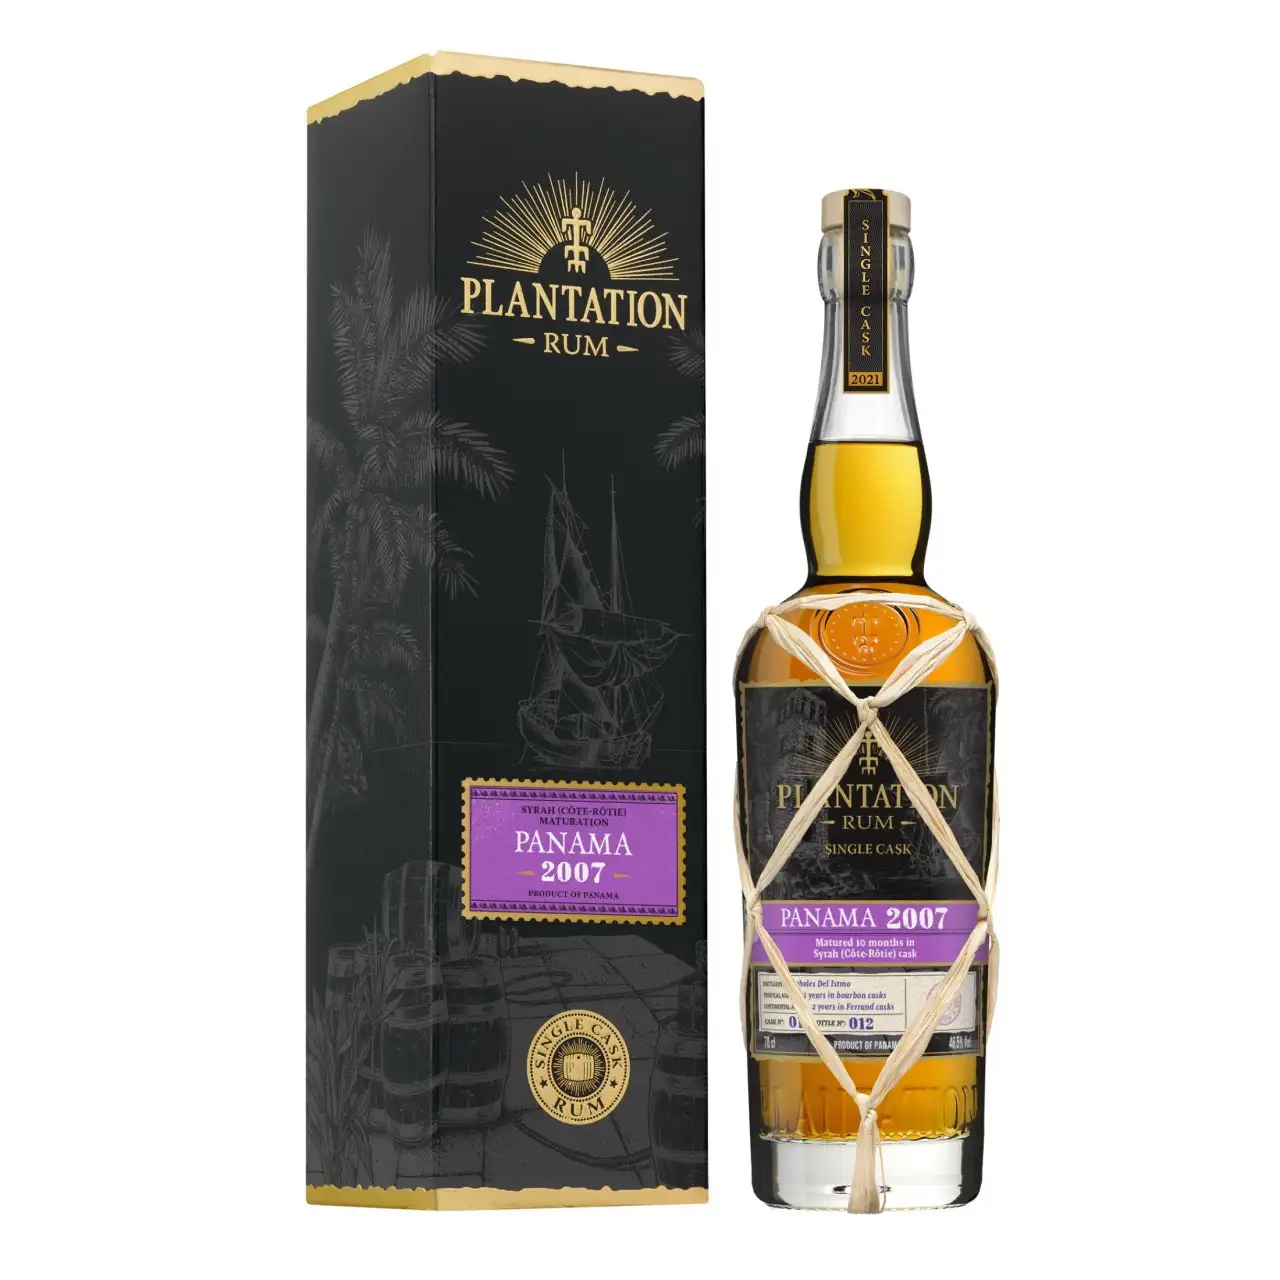 Image of the front of the bottle of the rum Plantation Panama